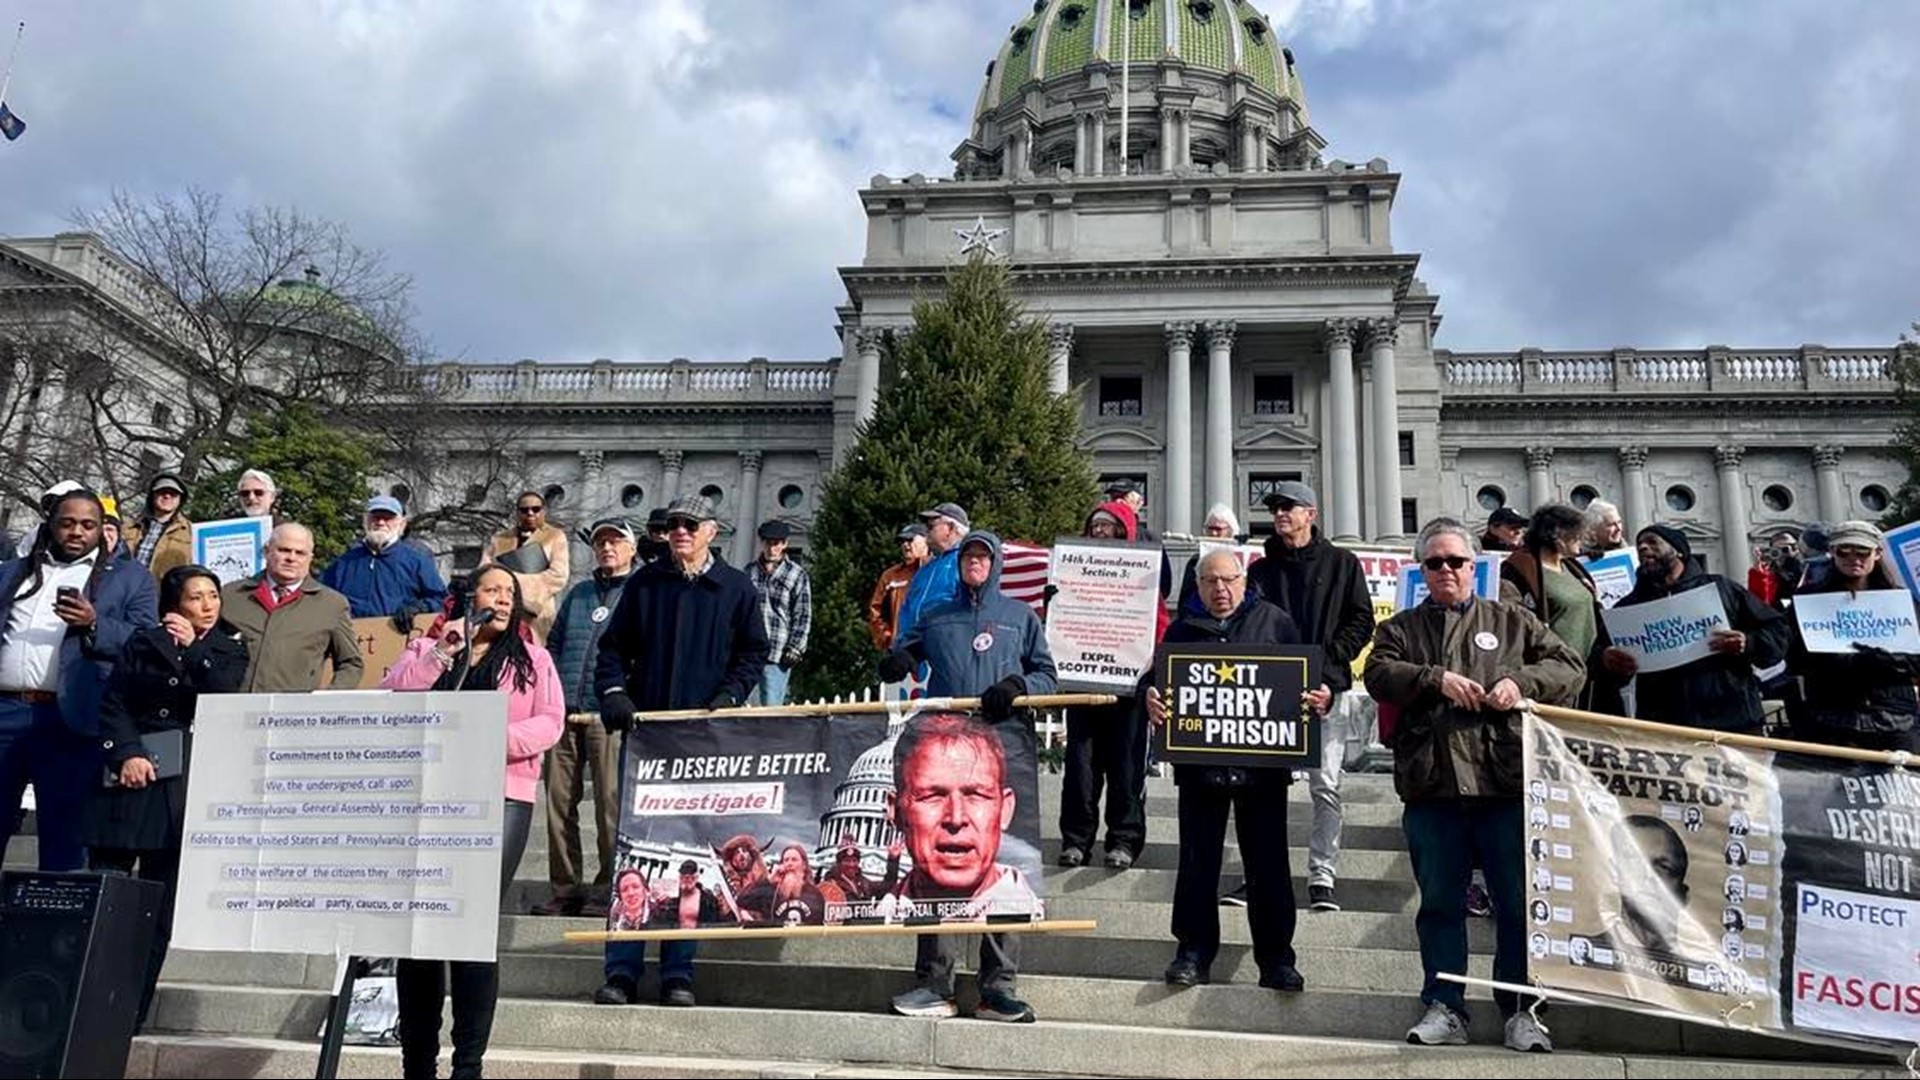 A rally in Harrisburg was held in remembrance of the insurrection at the U.S. Capitol on Jan. 6, 2021.